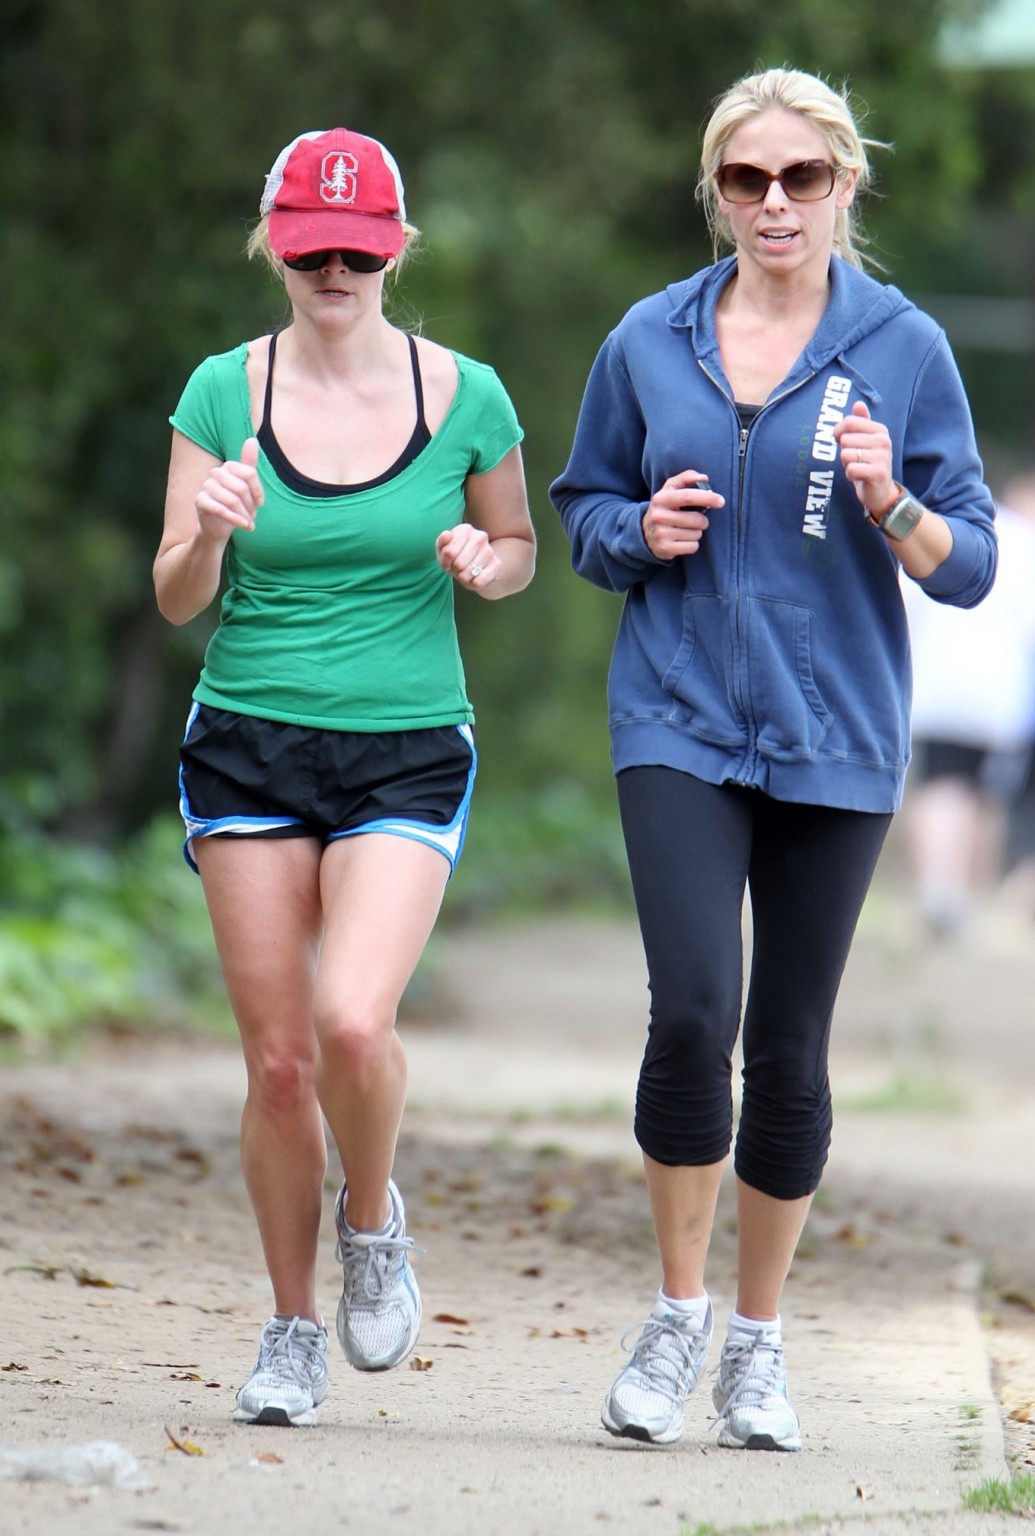 Reese Witherspoon langbeinig in Shorts beim Joggen in Brentwood
 #75312898